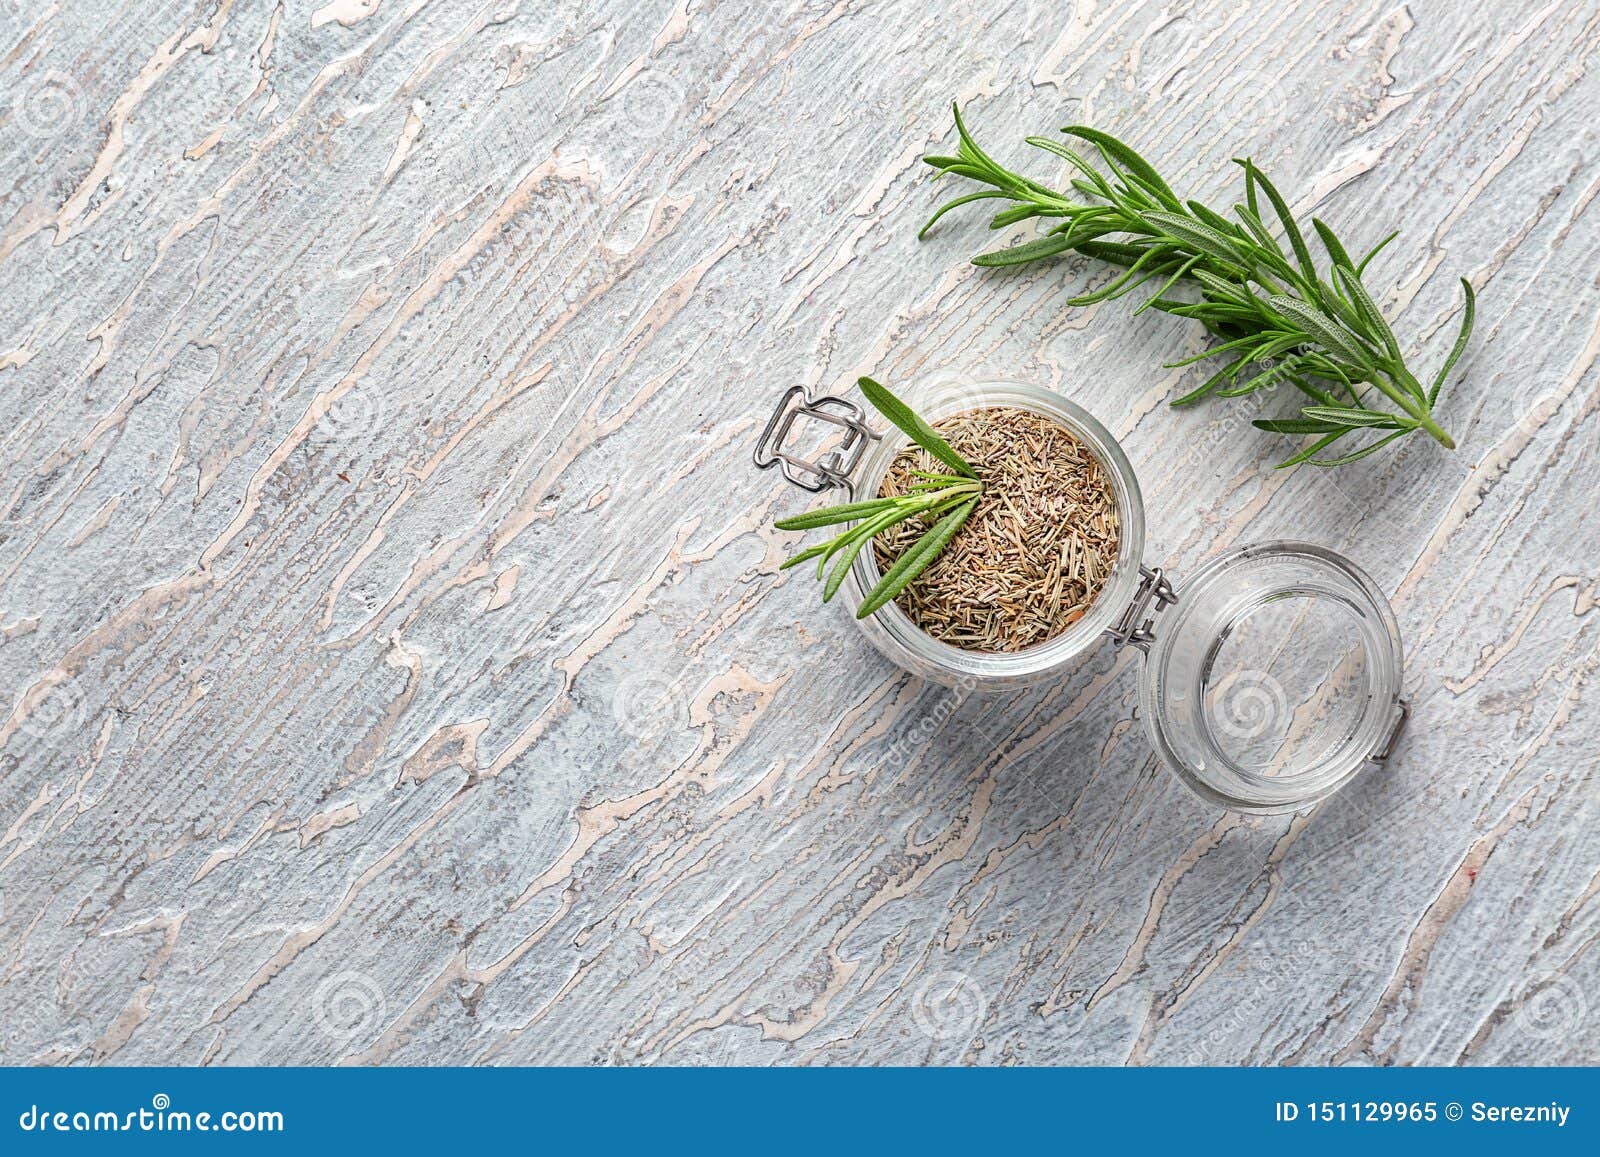 Glass Jar with Dried and Fresh Rosemary on Table Stock Image - Image of ...